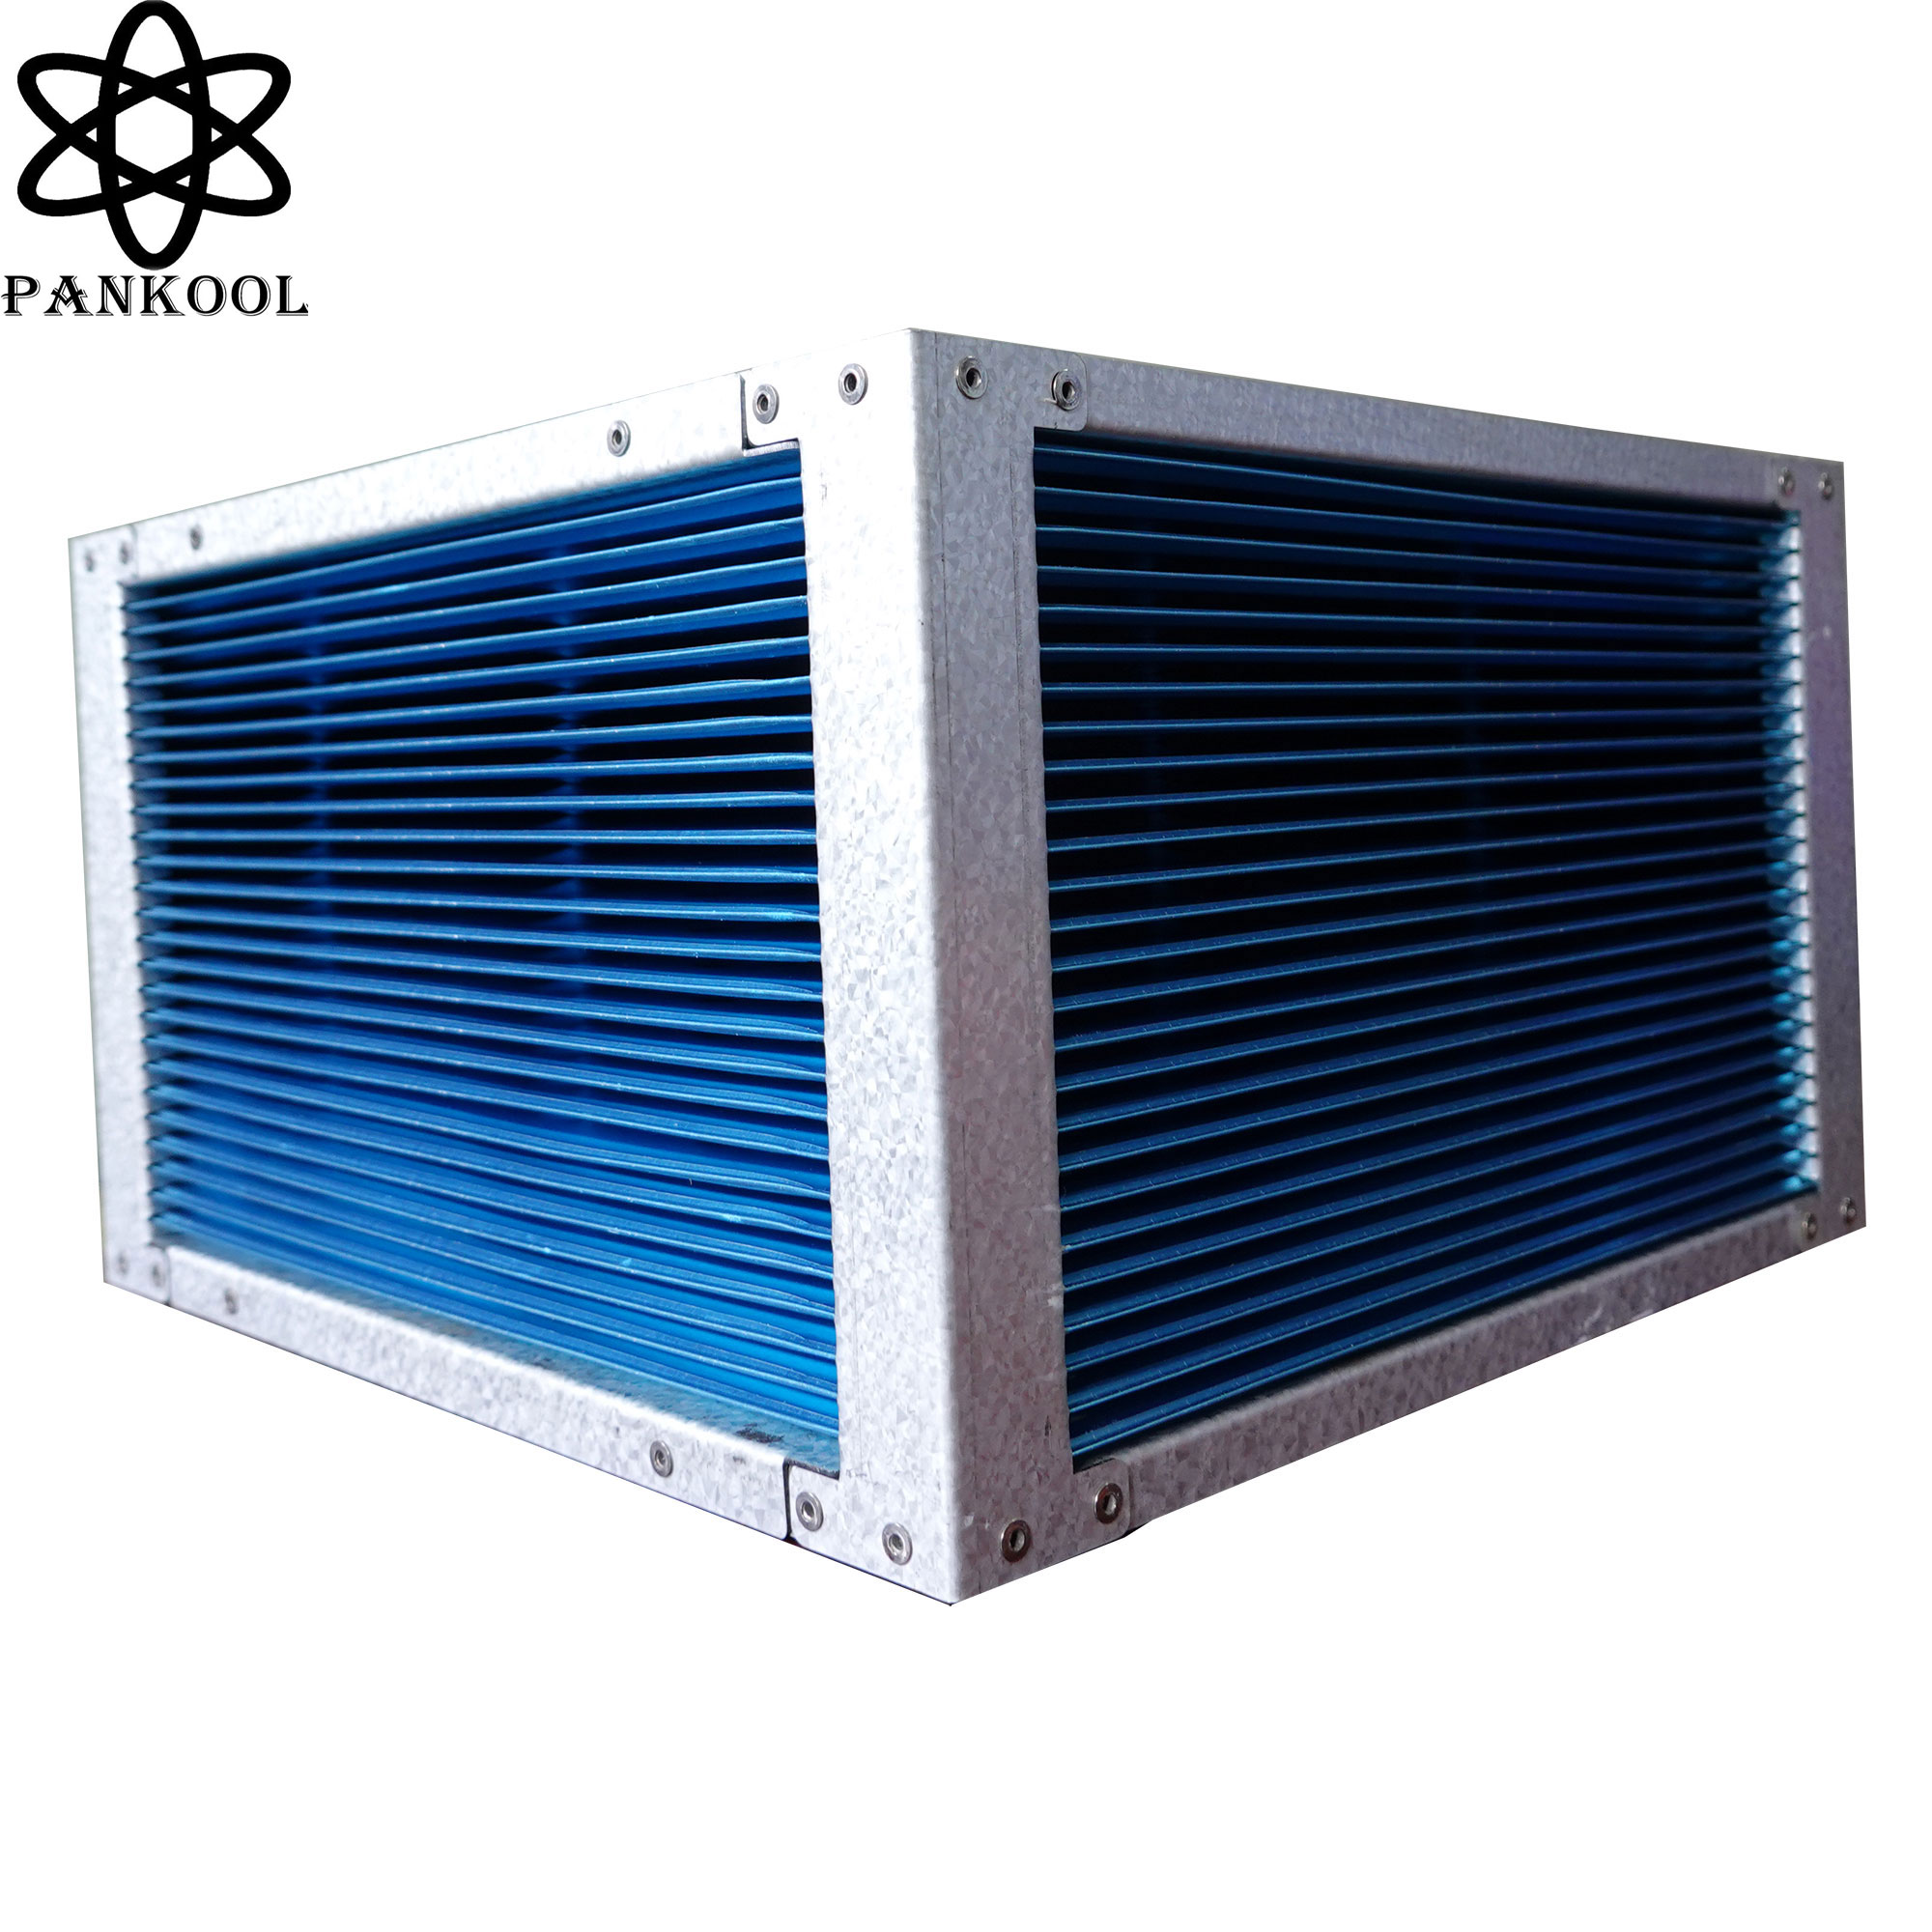 Top Dehumidifier Supplier, Factory in China - Shop Now at Home Depot